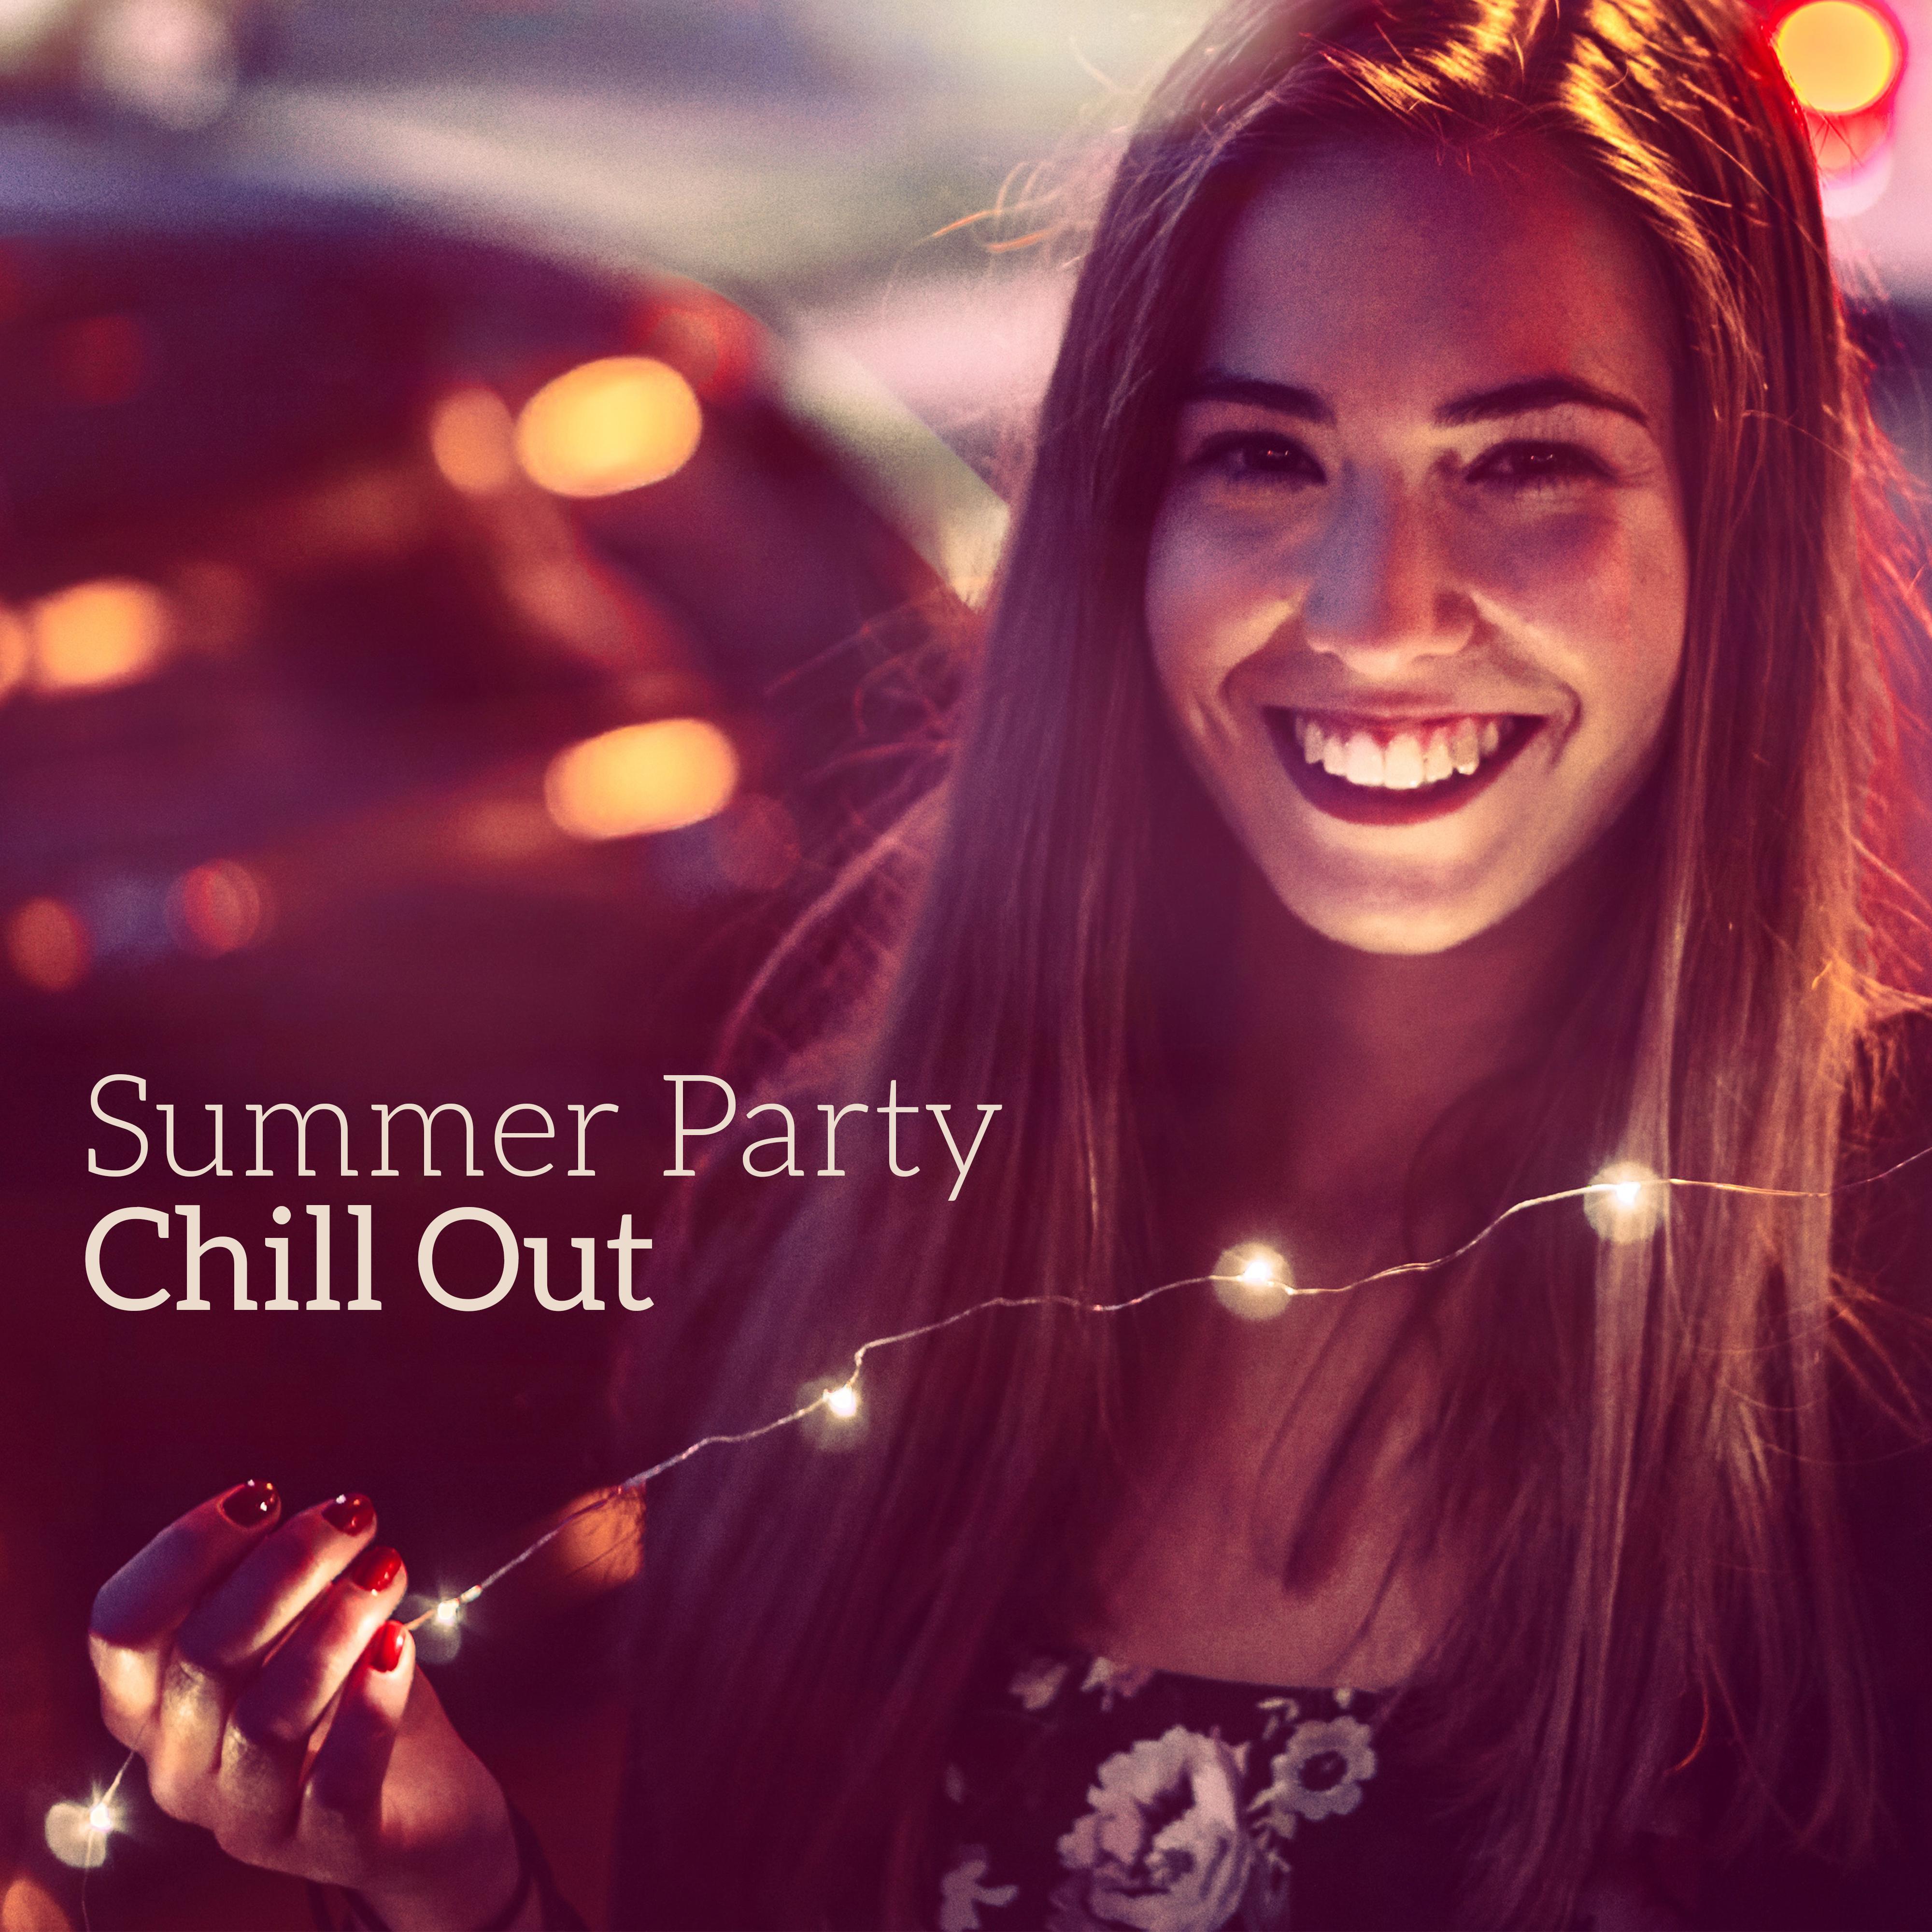 Summer Party Chill Out – Easy Listening Songs, Stress Relief, Peaceful Vibes, Calm Down & Relax